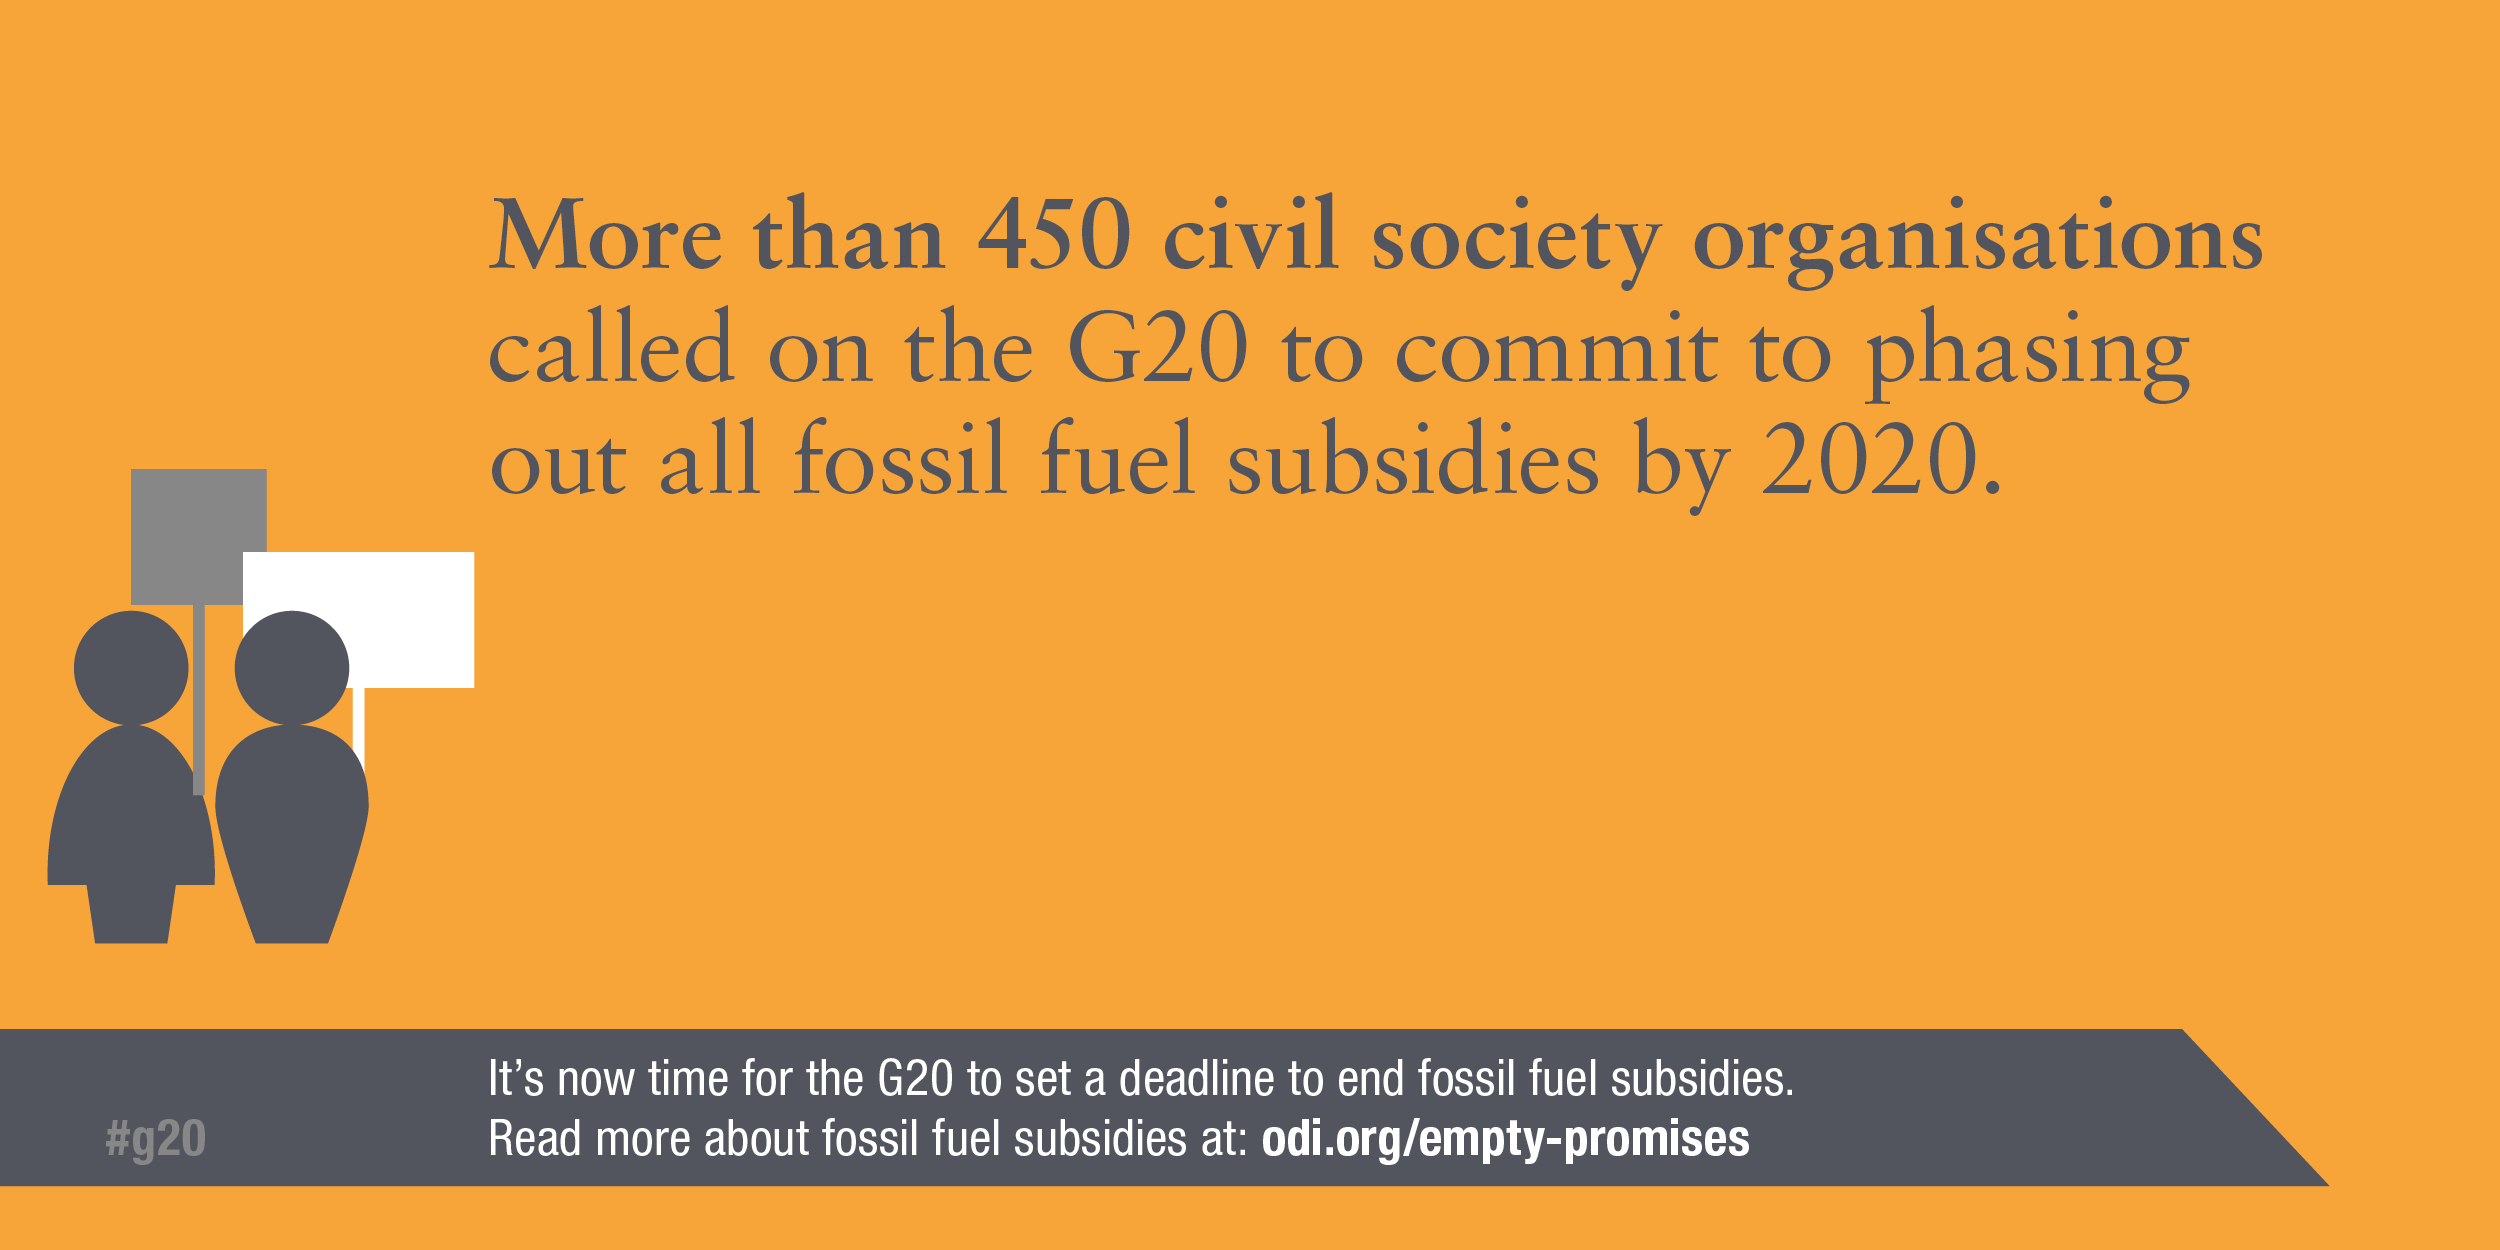 Infographic: More than 450 civil society organisations have called on the G20 to end fossil fuel subsidies by 2020